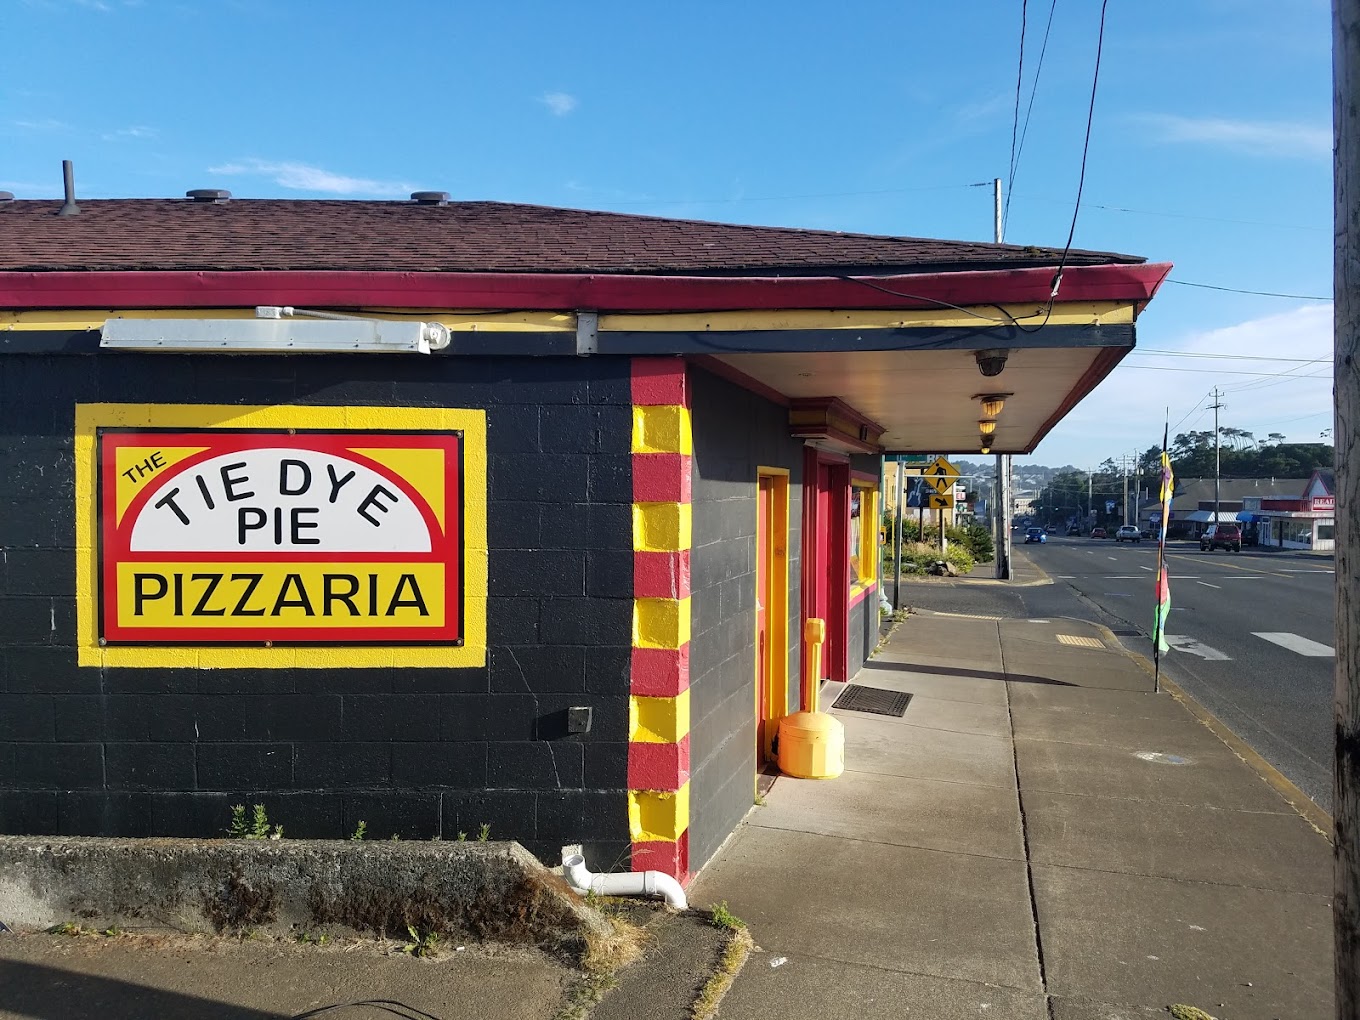 Find Hippie Vibes and Perfect Pies at this Oregon Coast Pizzeria 